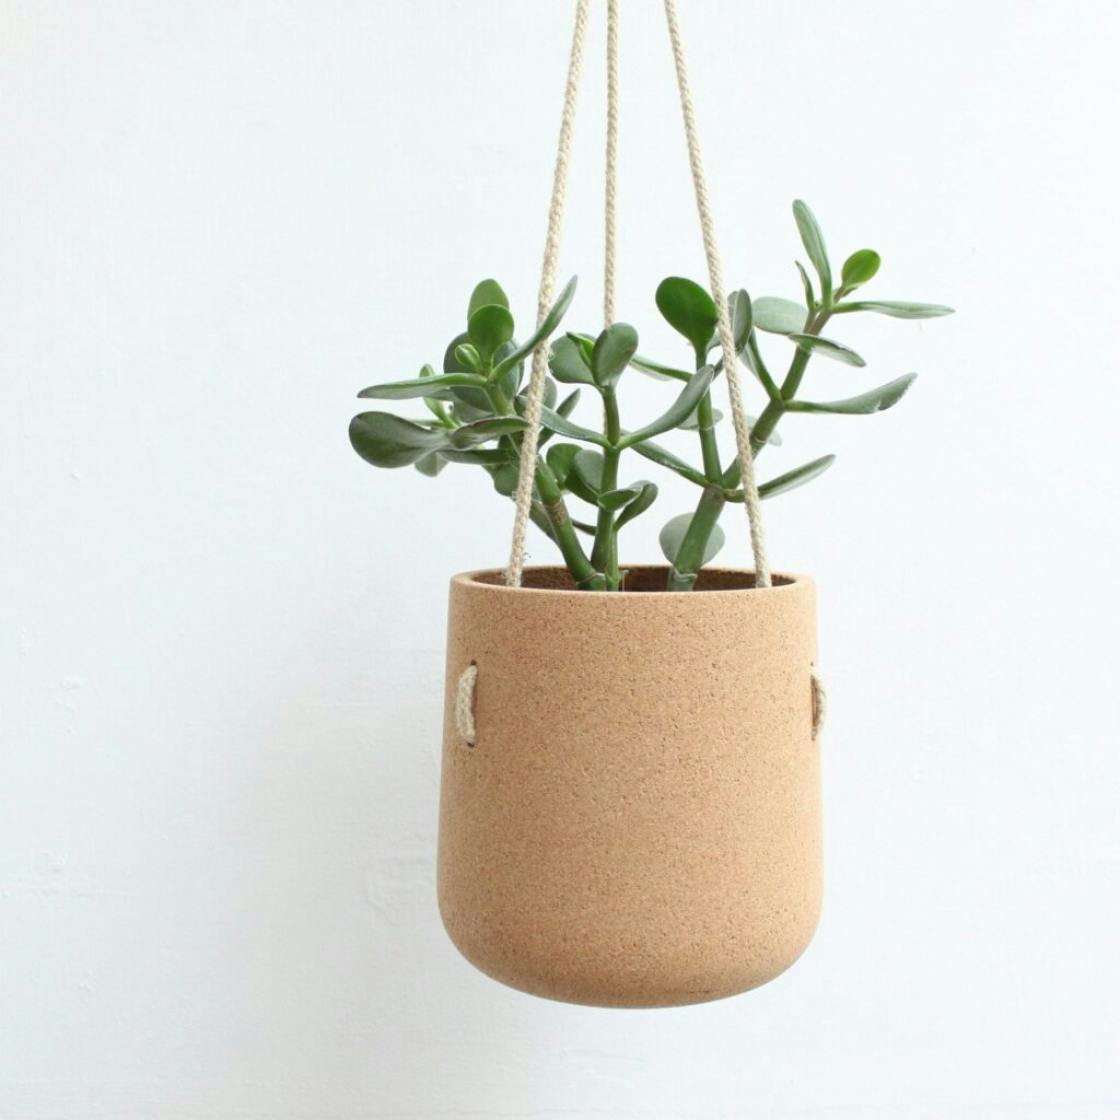 7 hanging plant pots  to give your plants  a stylish edge